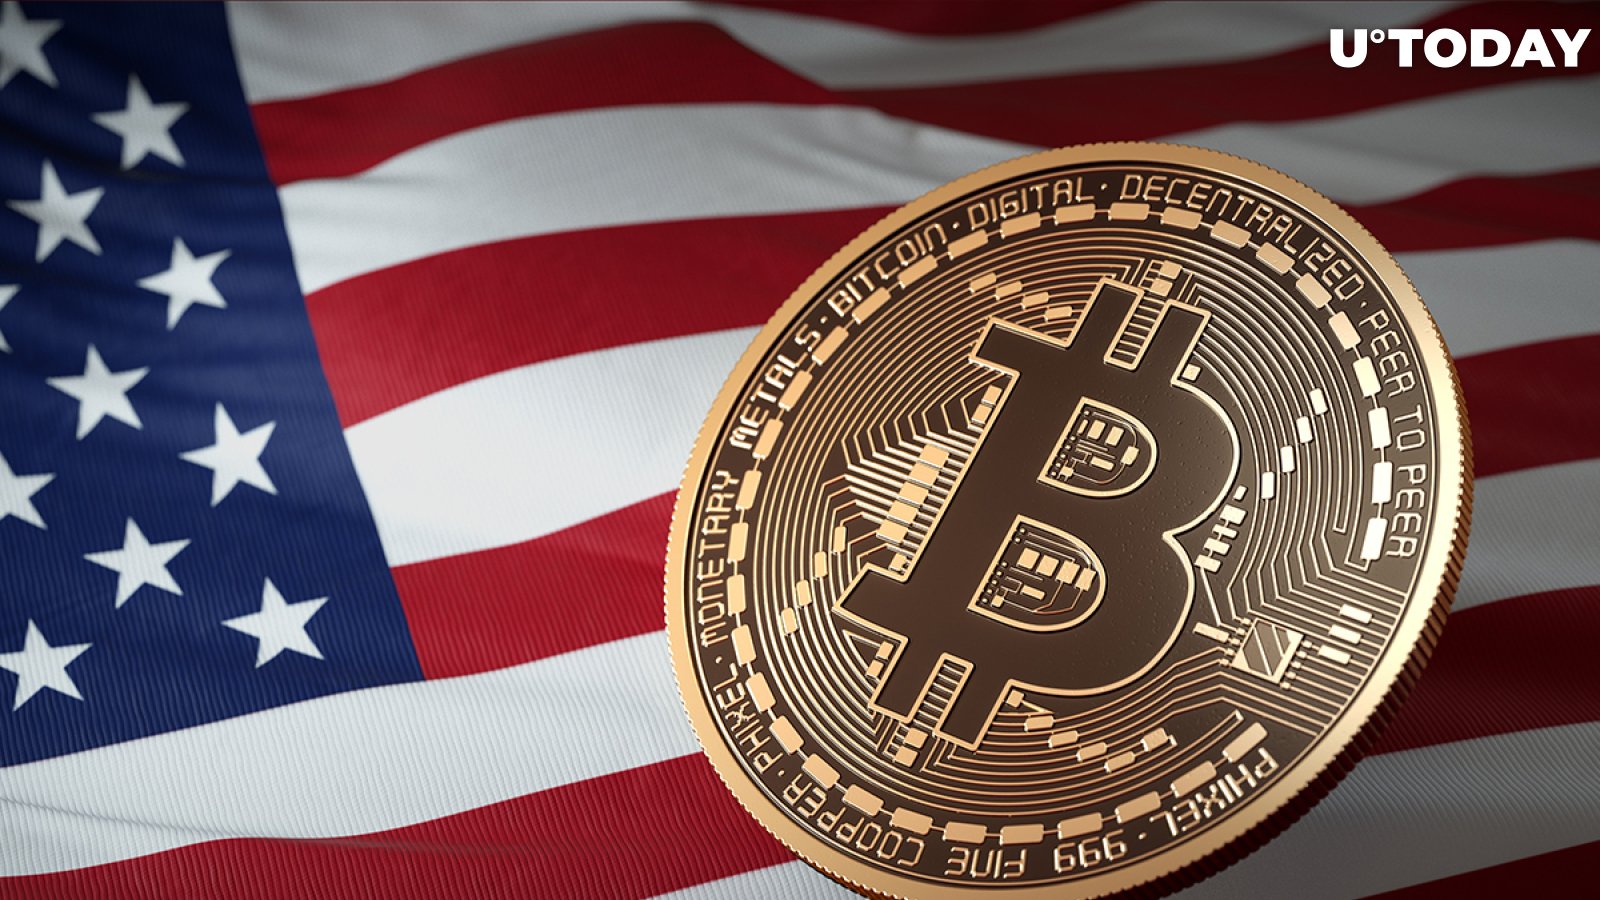 National Cryptocurrency Enforcement Team Launched by U.S. Deputy Attorney General